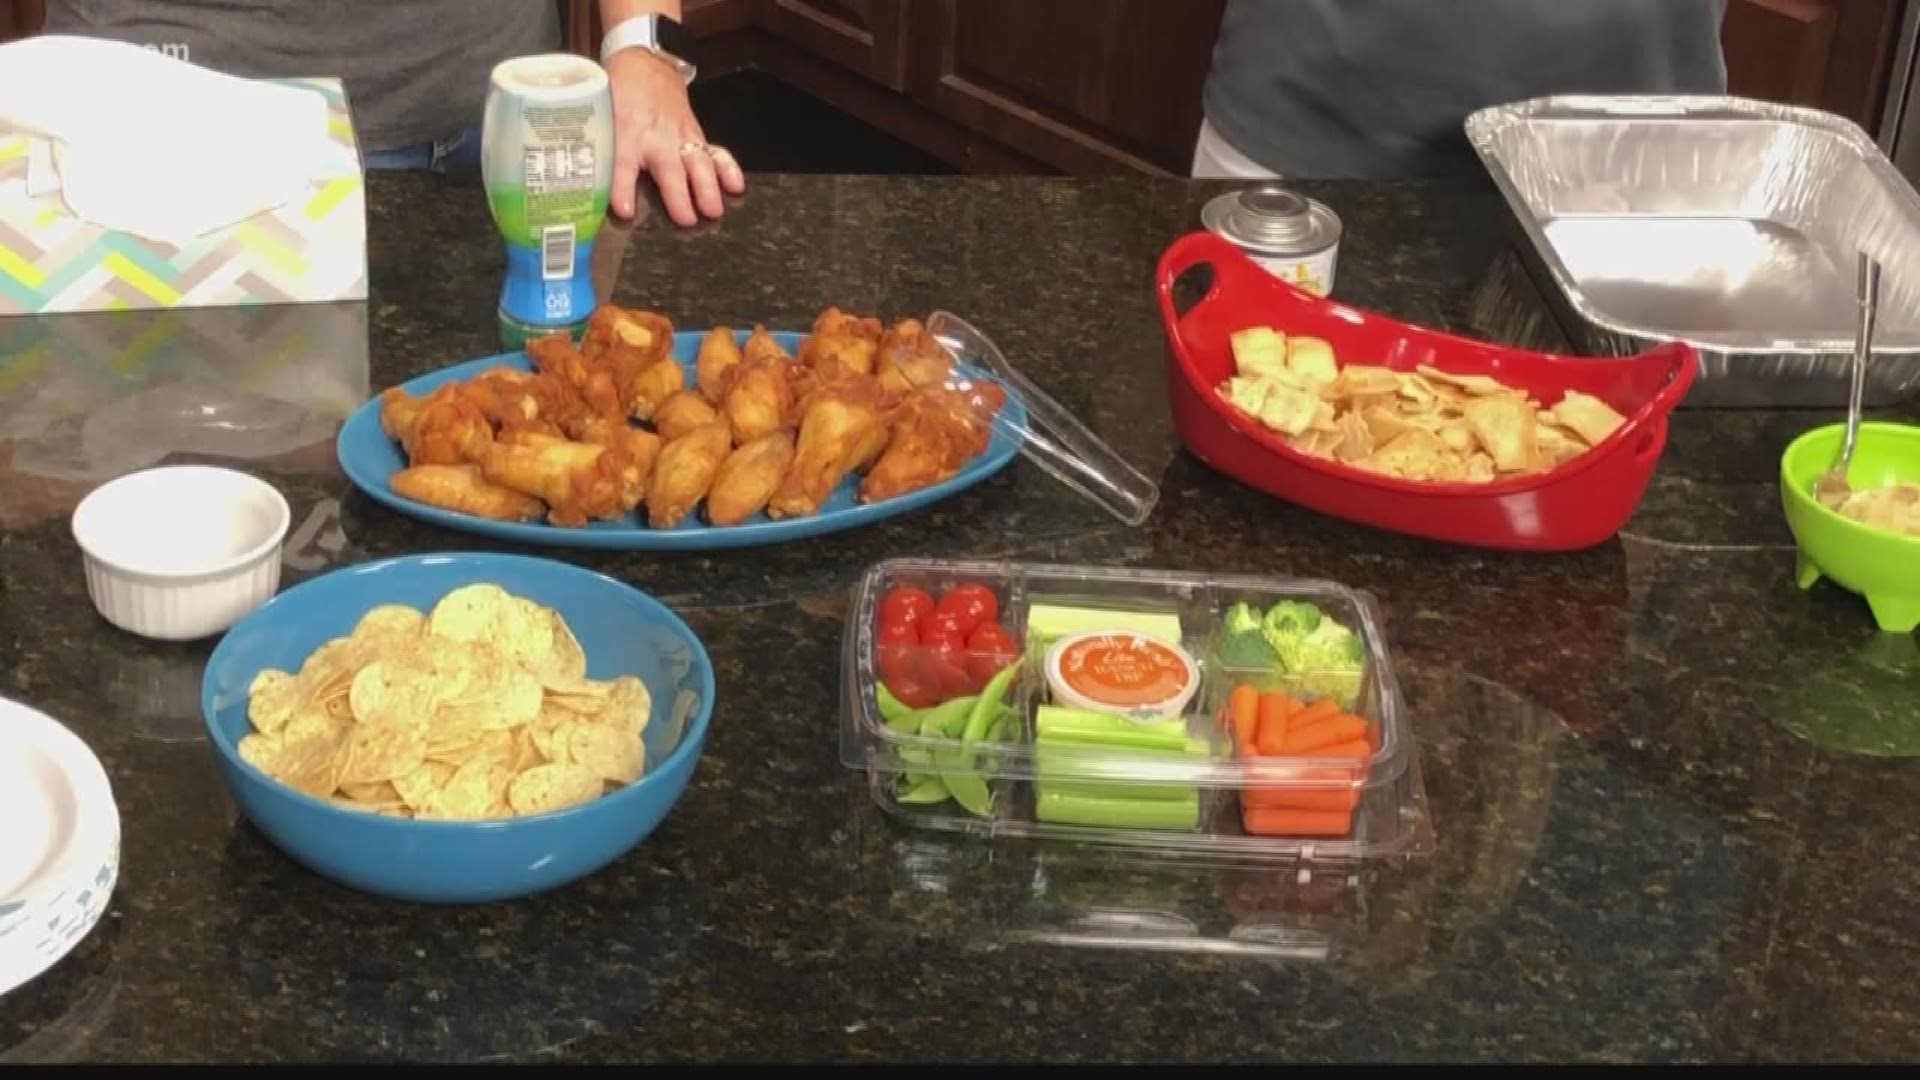 Having a party to watch the Super Bowl? A food safety expert has some good ideas to keep foods from spoiling and guests from getting sick.